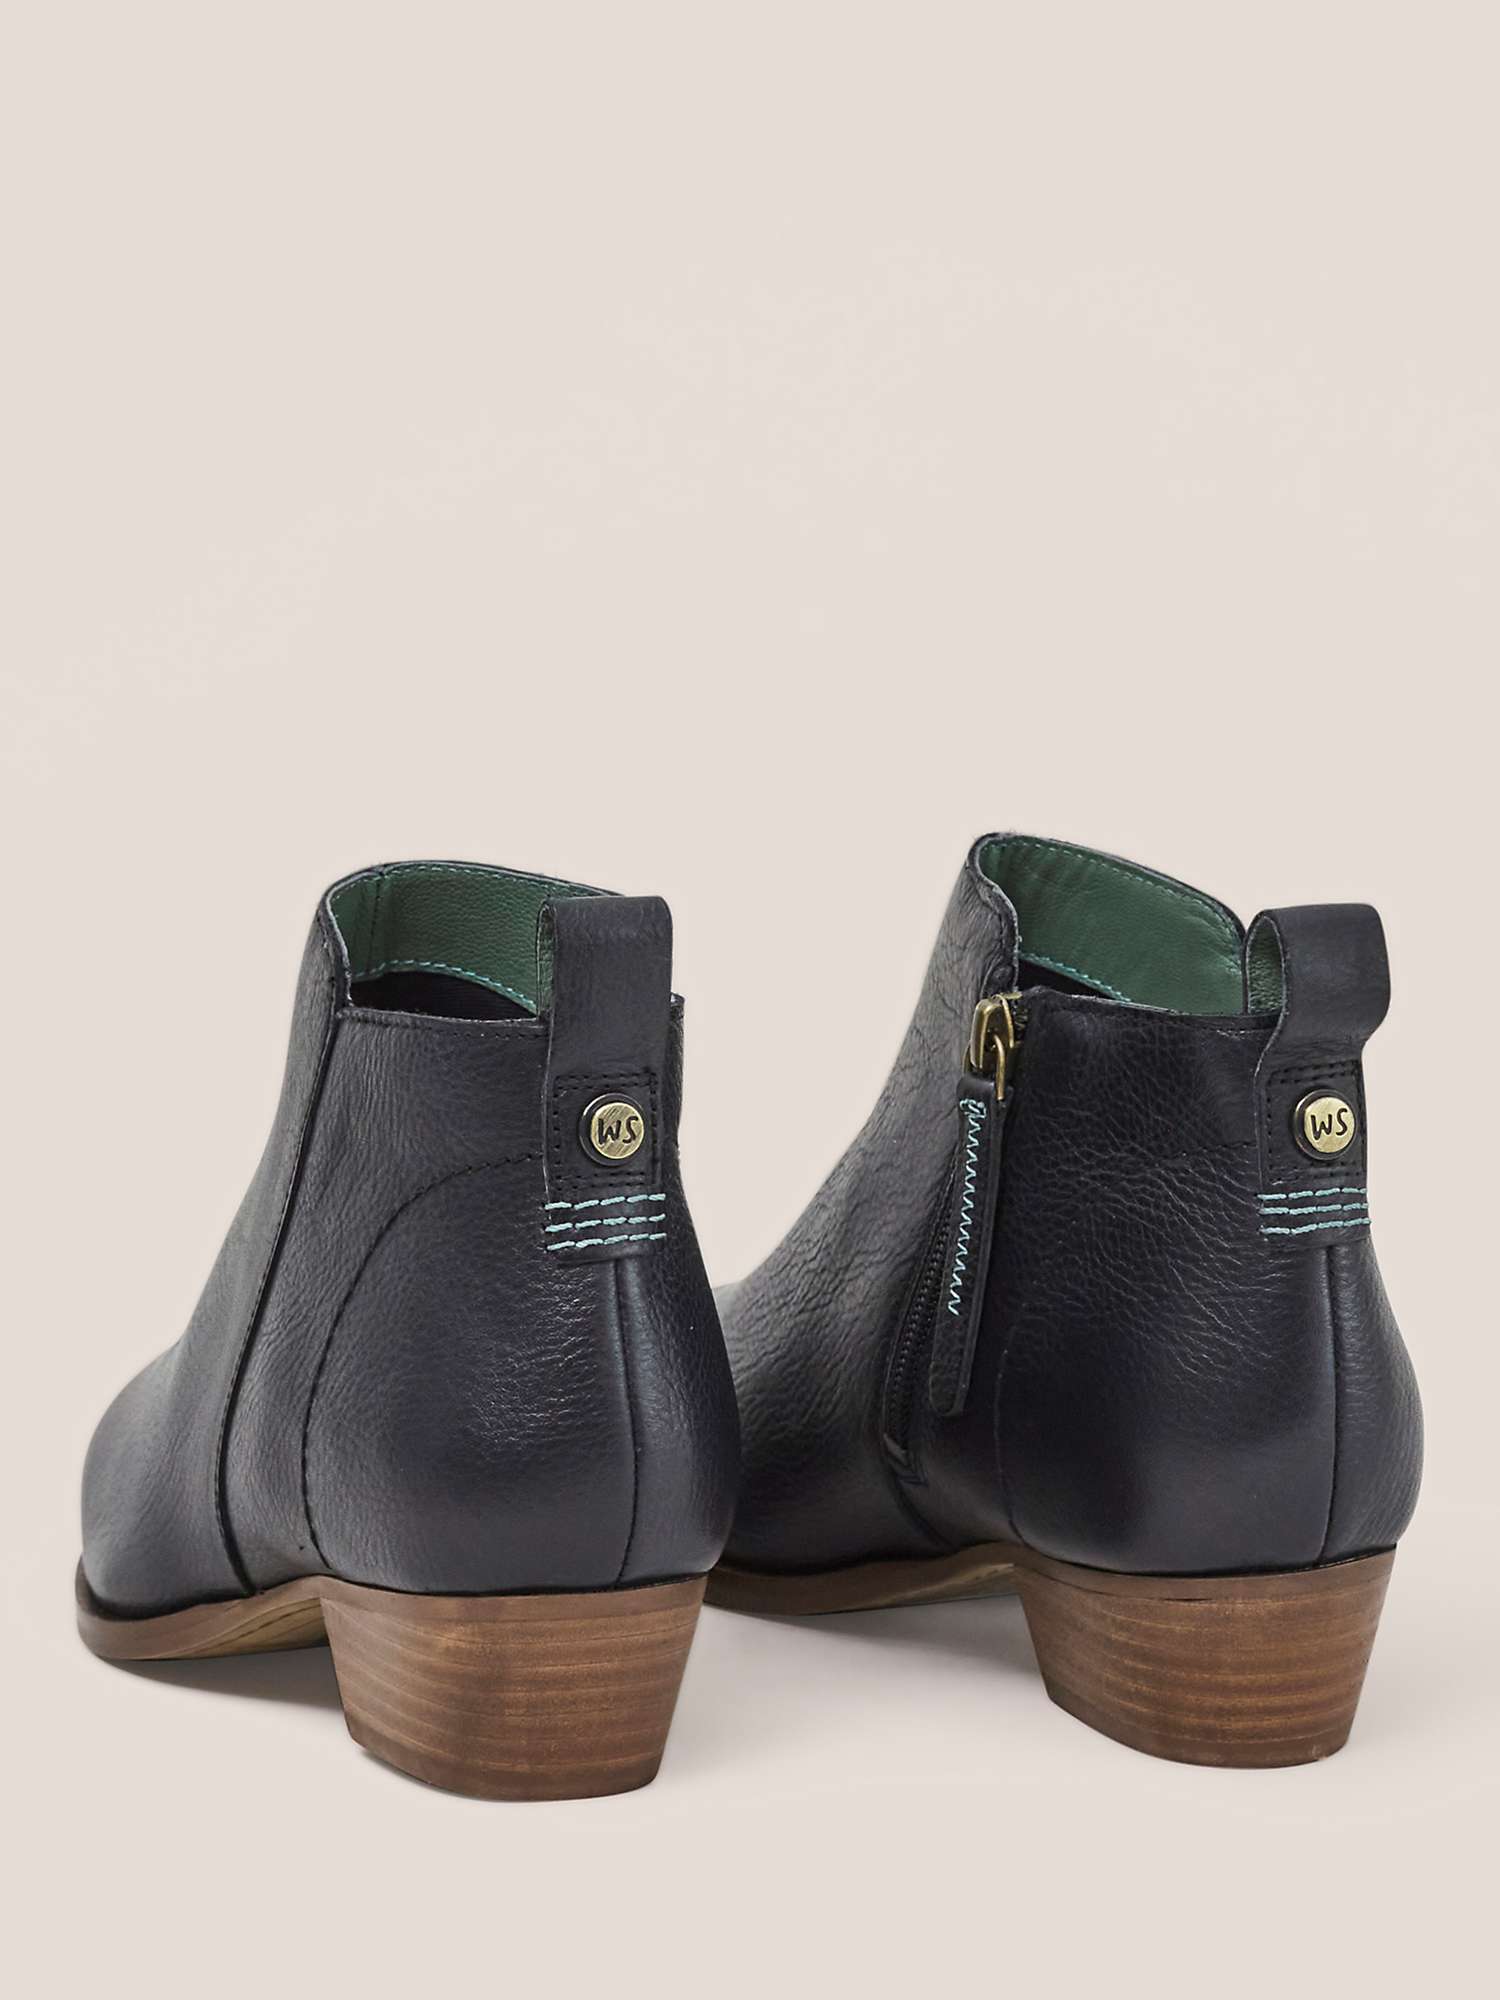 Buy White Stuff Leather Ankle Boots, Black Online at johnlewis.com